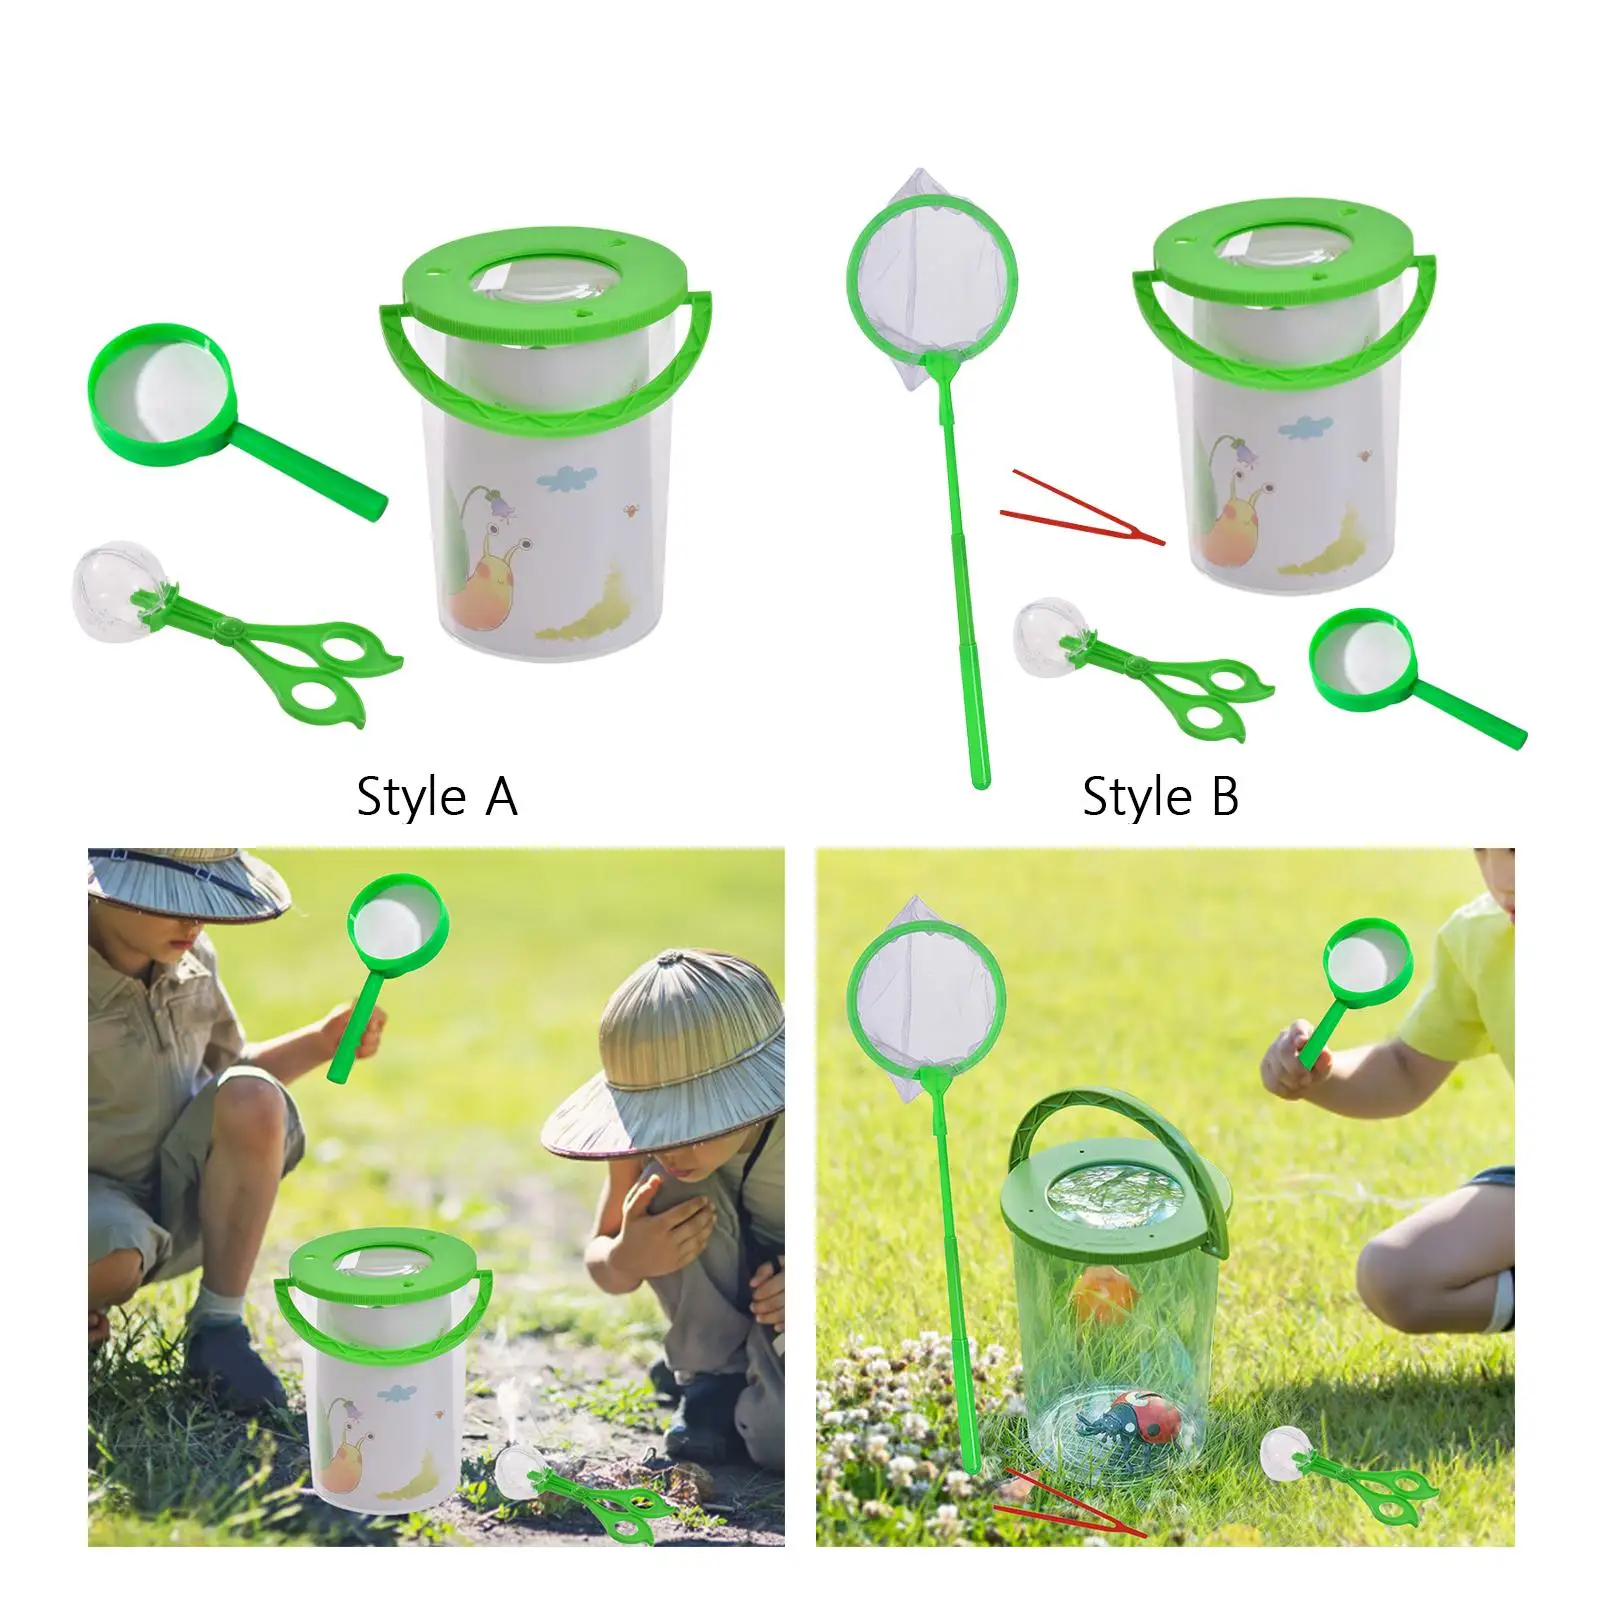 Insect Catcher Box Insect Viewer Insect Magnifier Container Magnifying Insect Box for Children Adventure 4 5 6 7 8